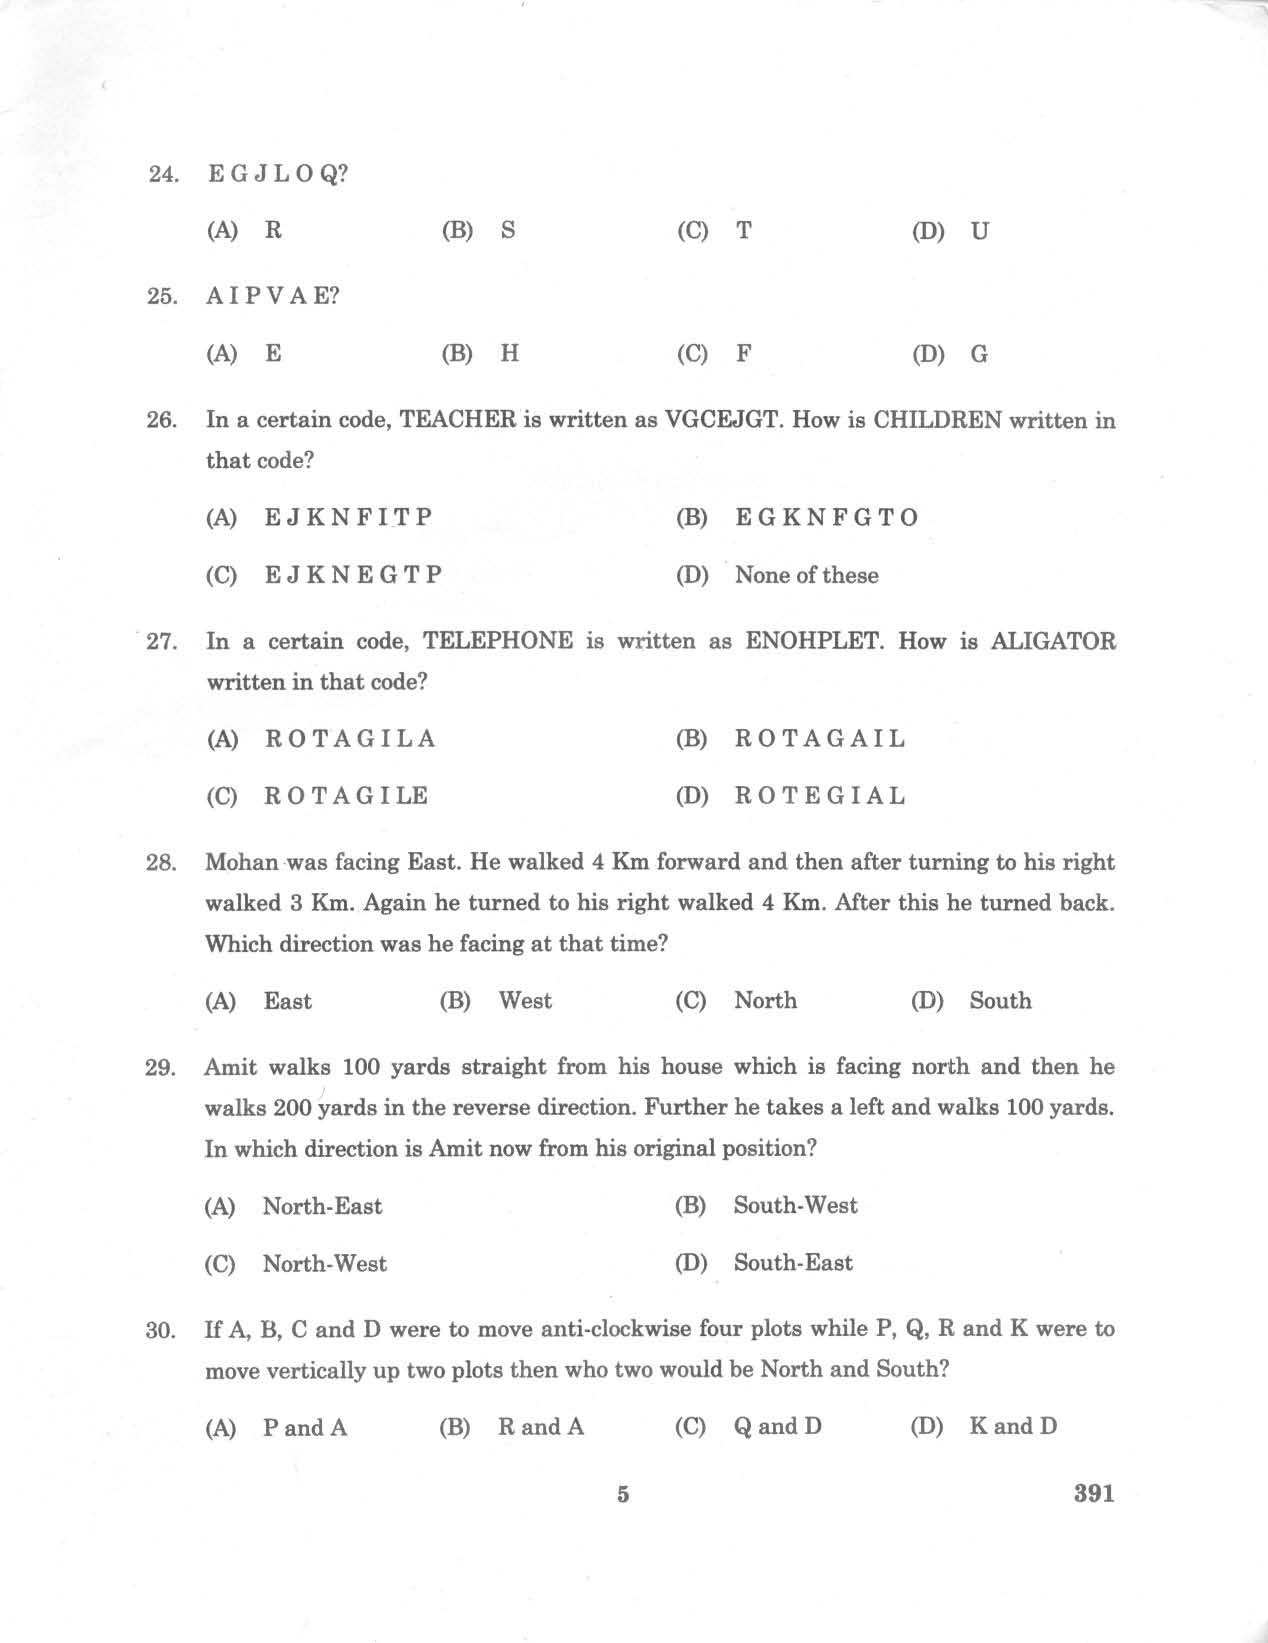 msw assignment question paper